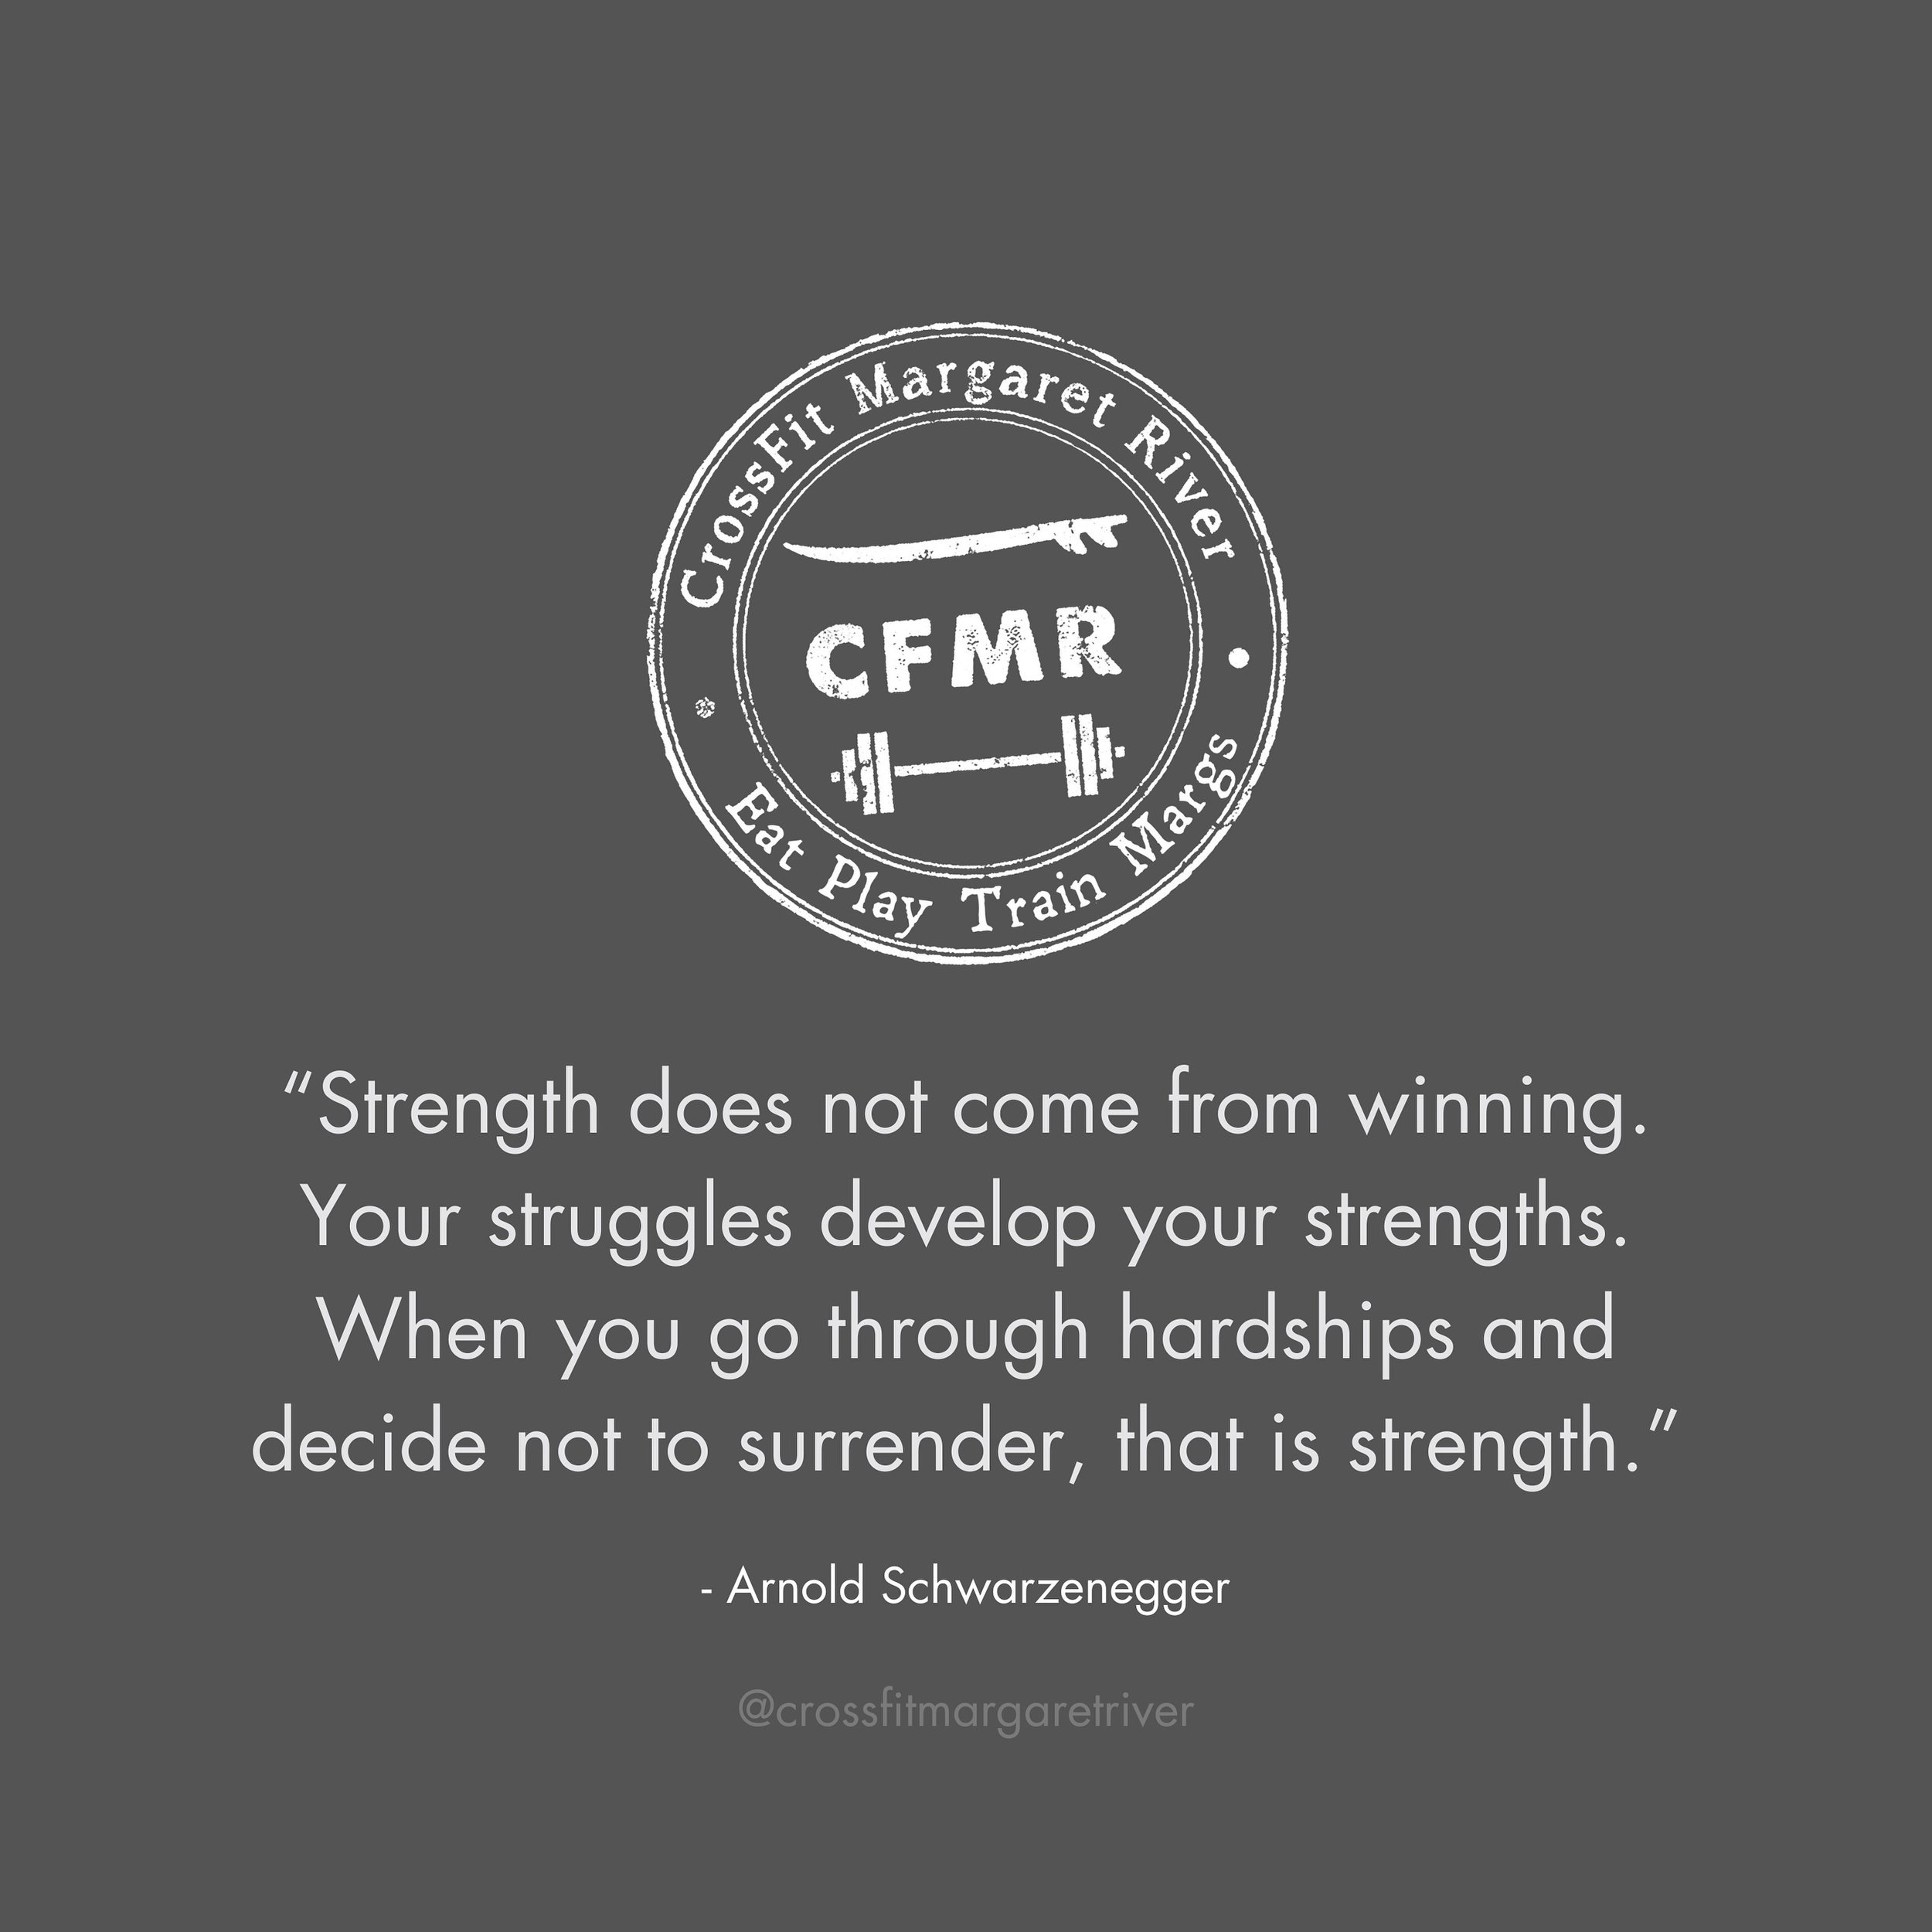 💪True strength is not derived from&nbsp;easy victories but enduring and overcoming challenges, as a product of struggle and resilience.
💪Persisting in the face of adversity&hellip;it is this experience of struggle, and the decision not to give up w